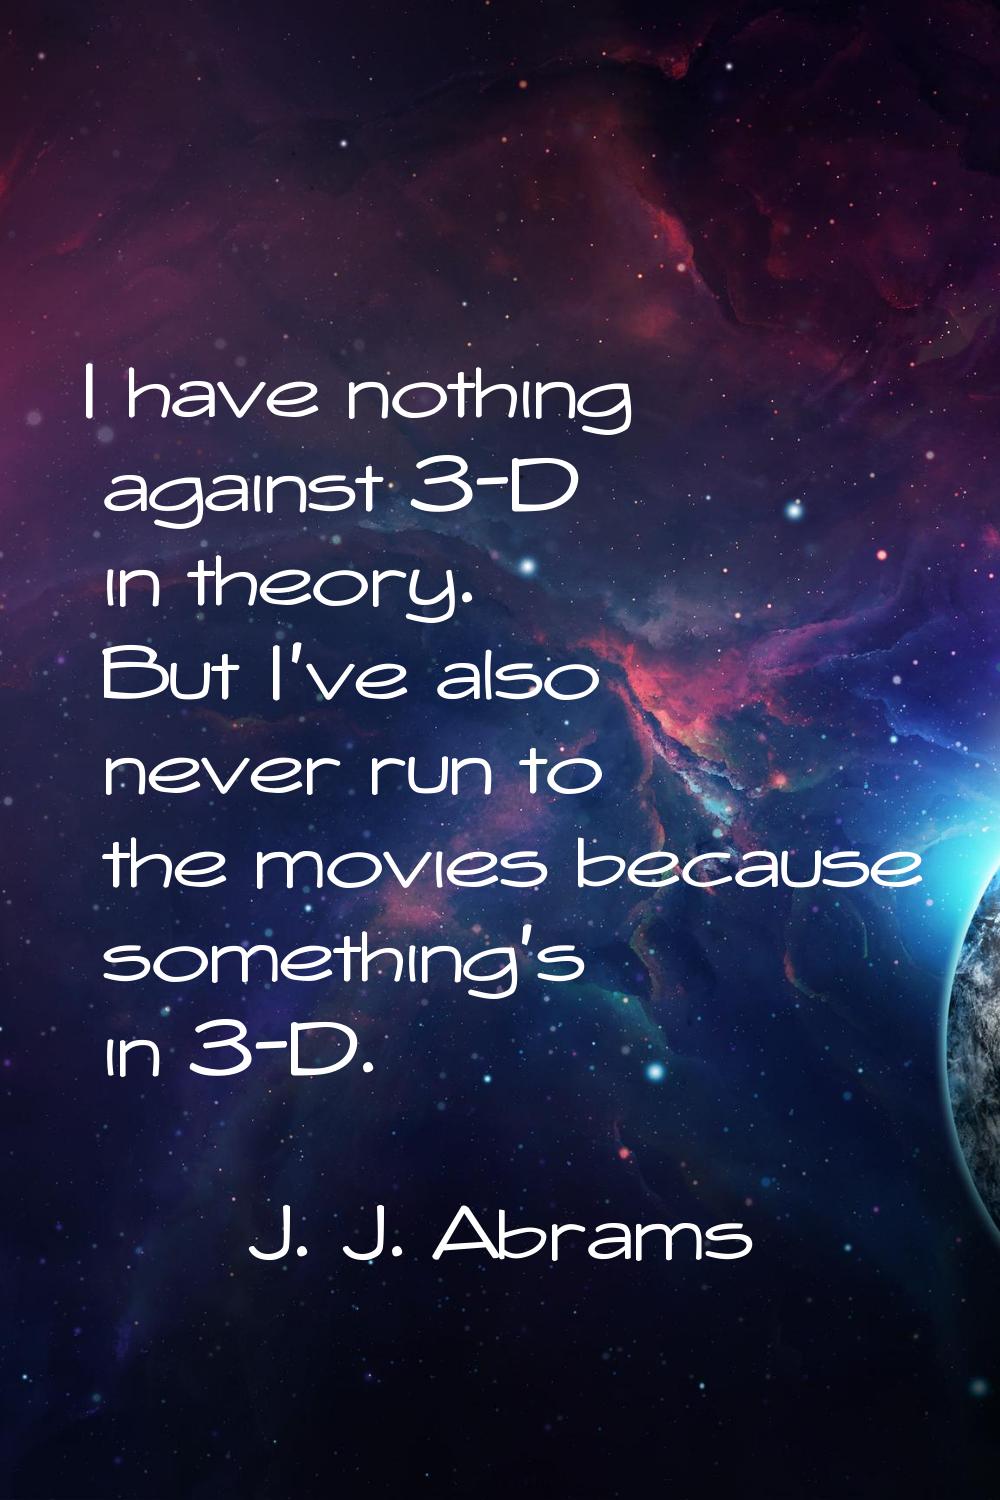 I have nothing against 3-D in theory. But I've also never run to the movies because something's in 